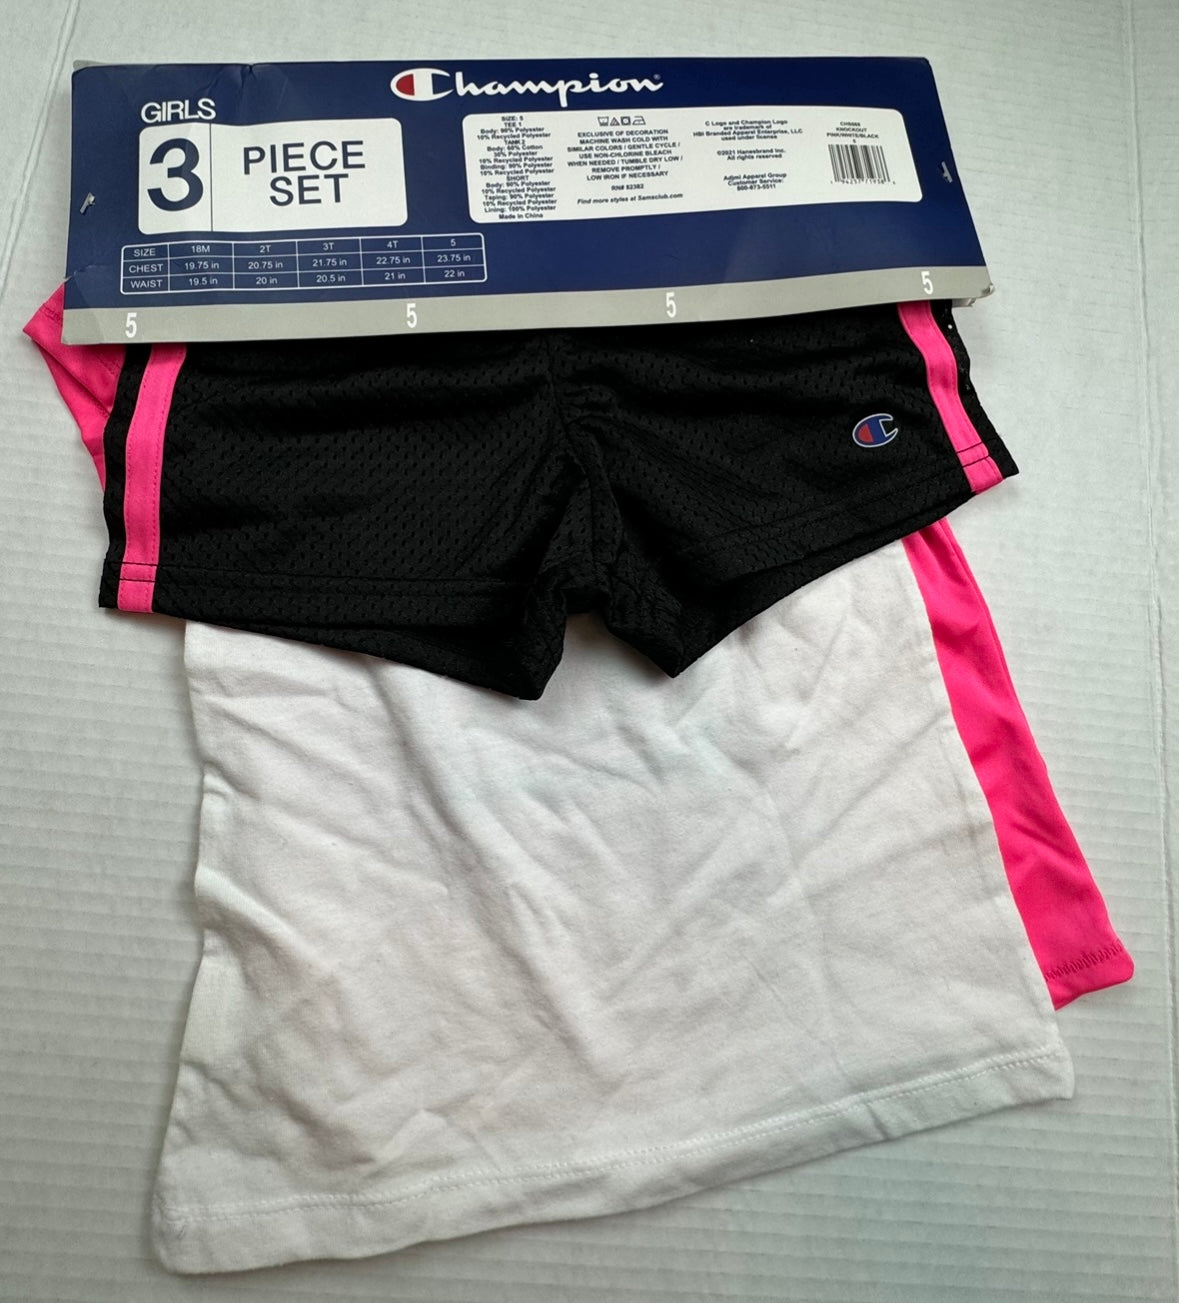 Girls Size 5 (3) Piece Set Athletic Shirts and Shorts Pink and Black NEW NWT